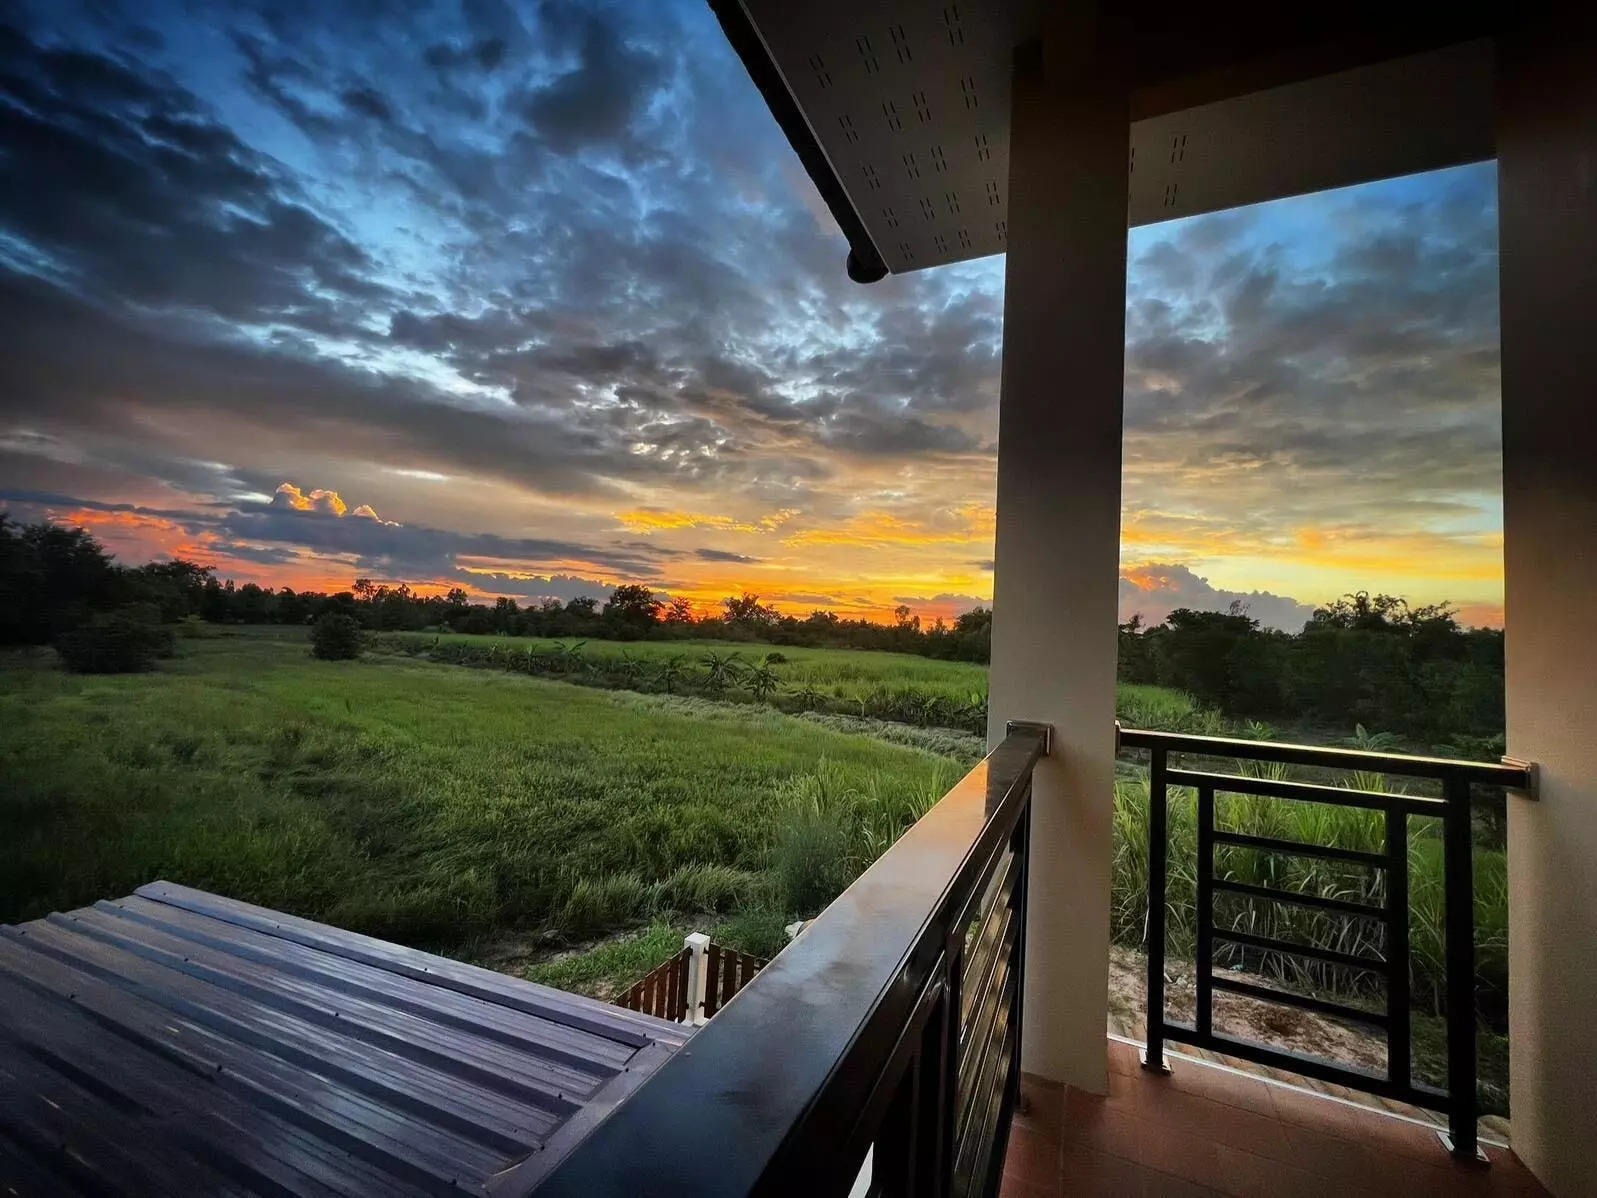 A sunset as viewed from the balcony of a home.